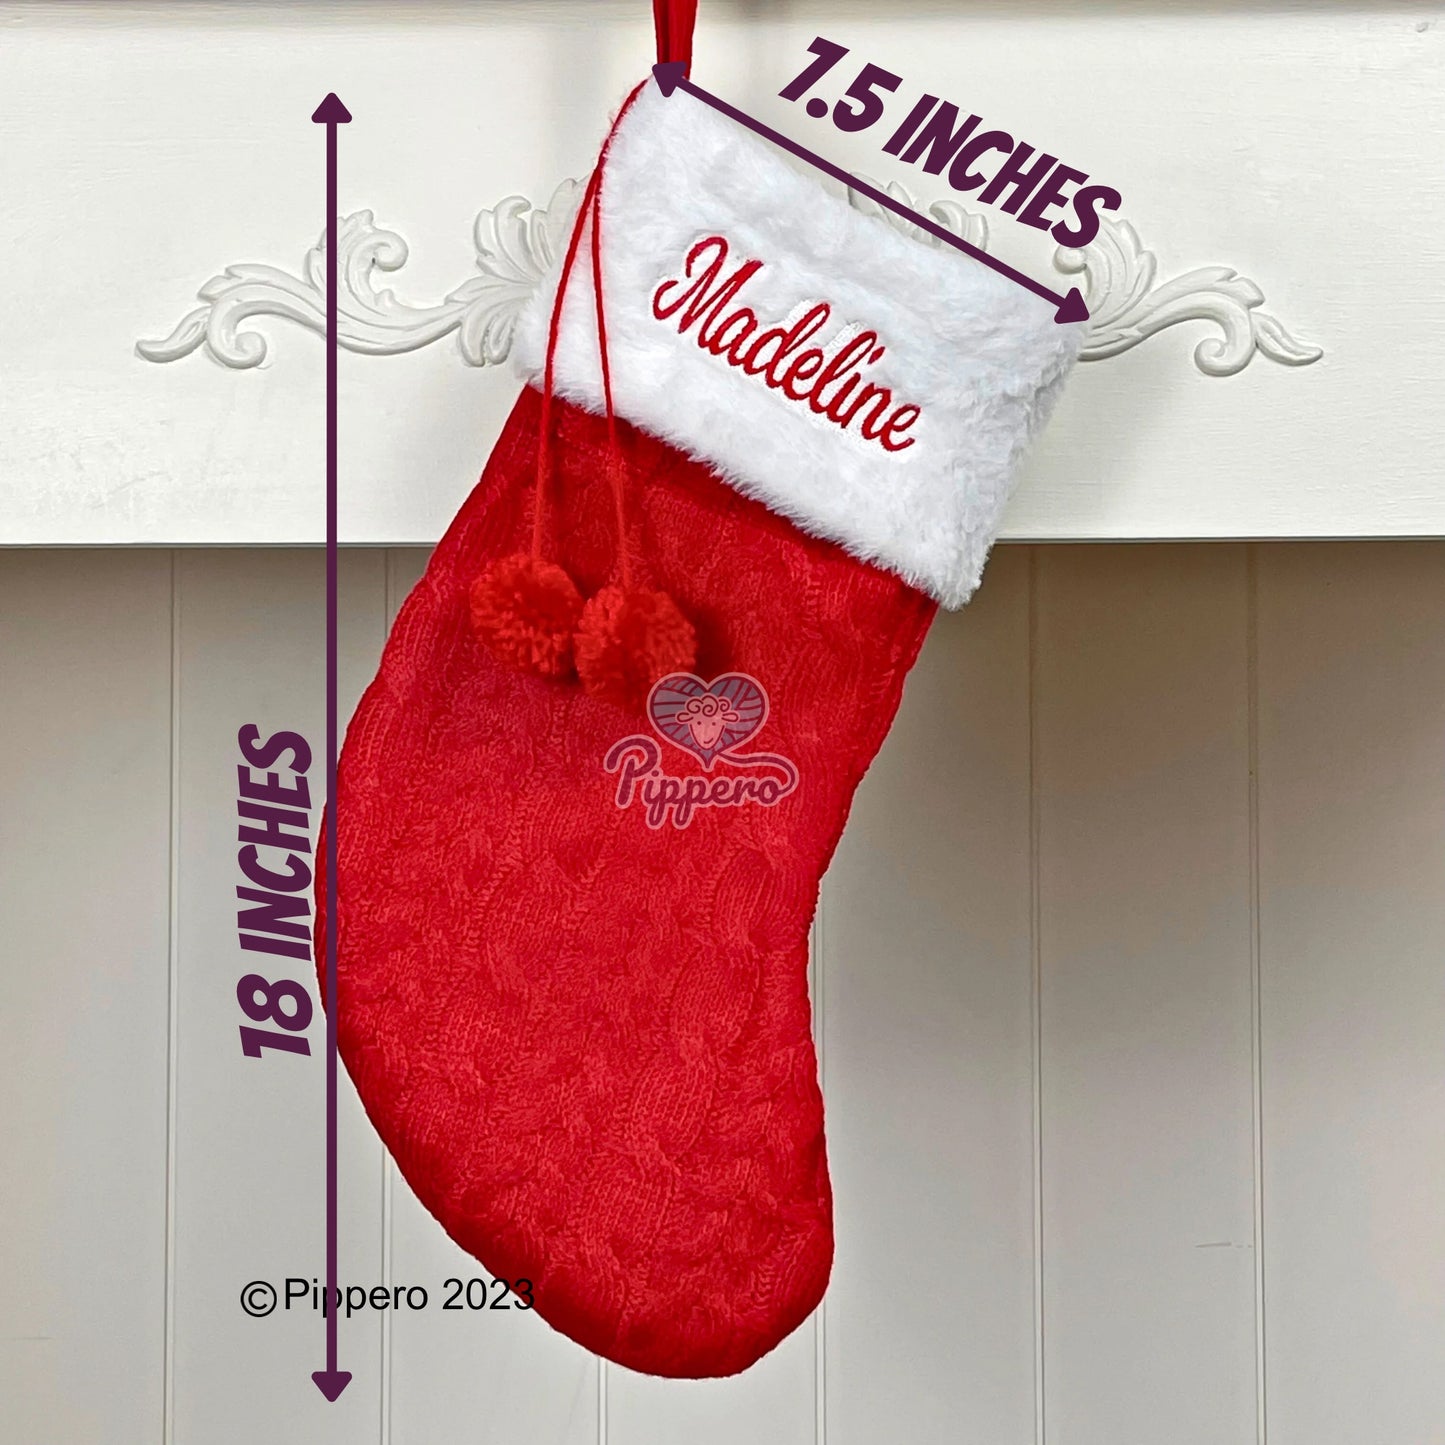 Custom Personalized Embroidered Classic Family Christmas Stockings with Furry Cuff and Poms Red Green White